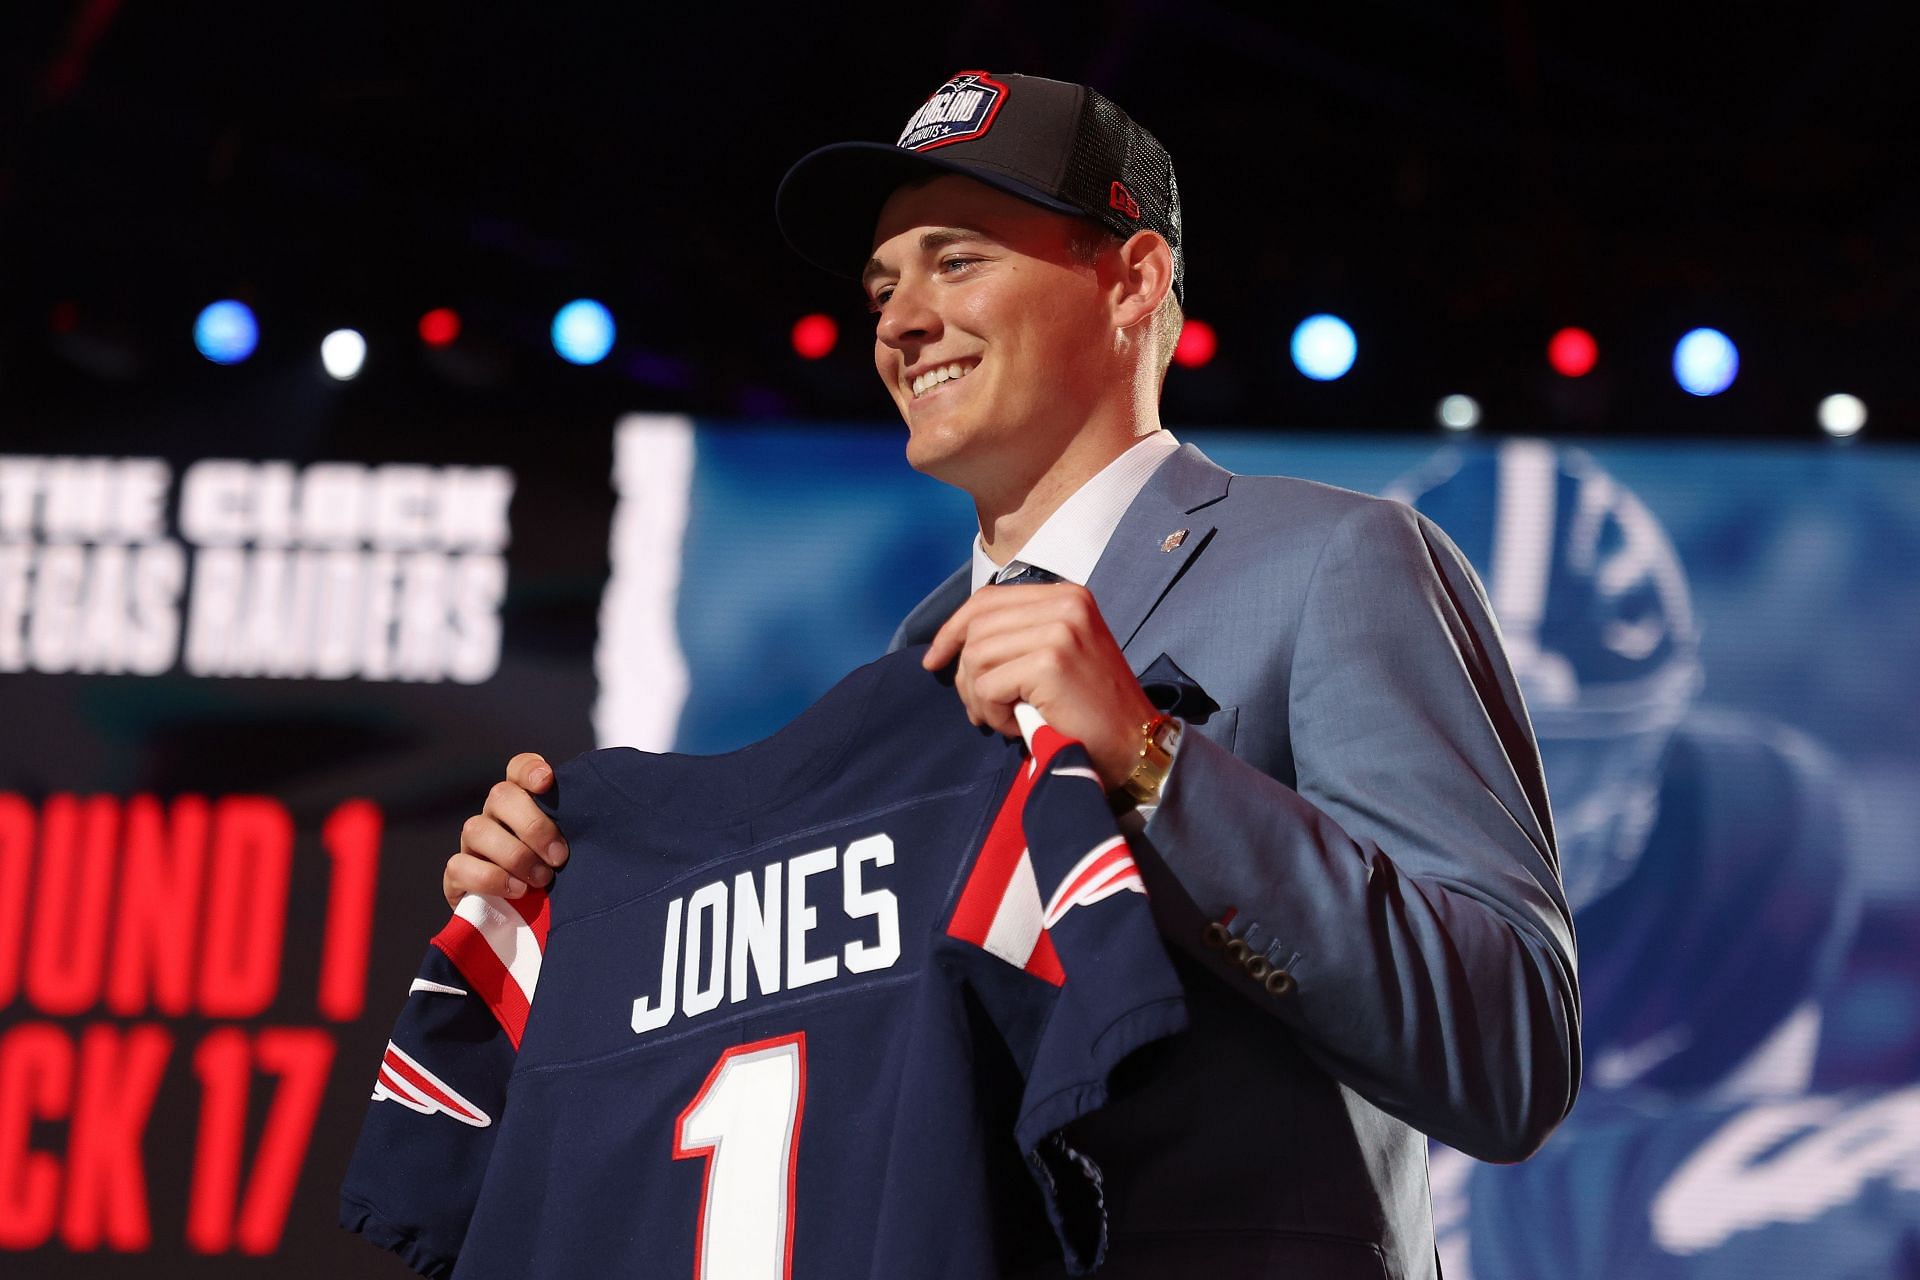 New Patriots quarterback holds his jersey at the 2021 NFL Draft